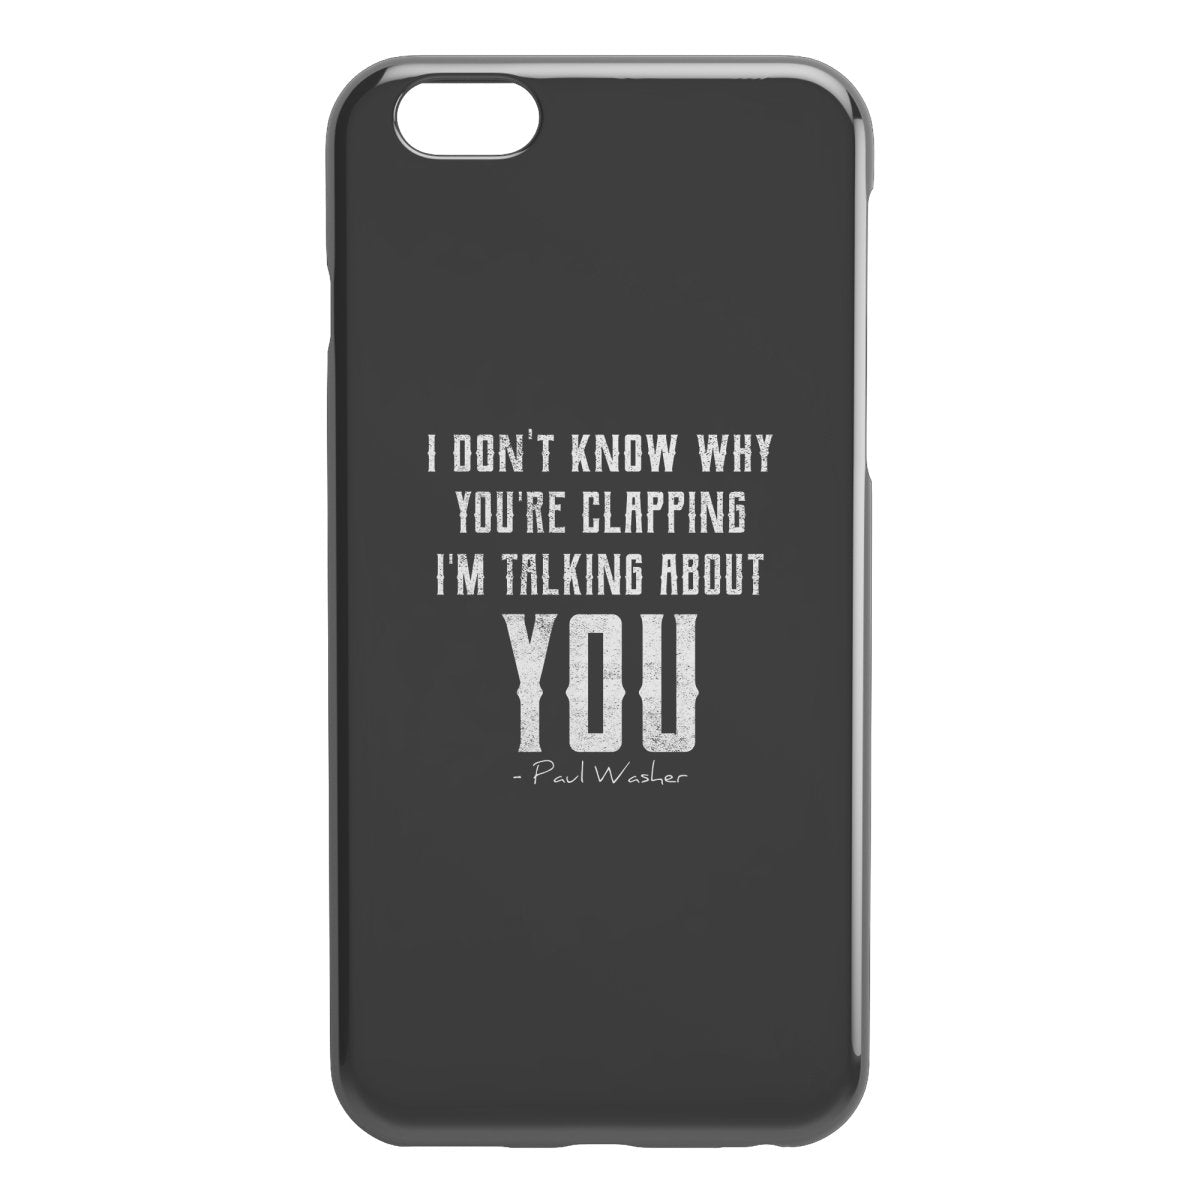 "I Don't Know Why You're Clapping" iPhone Cases - SDG Clothing